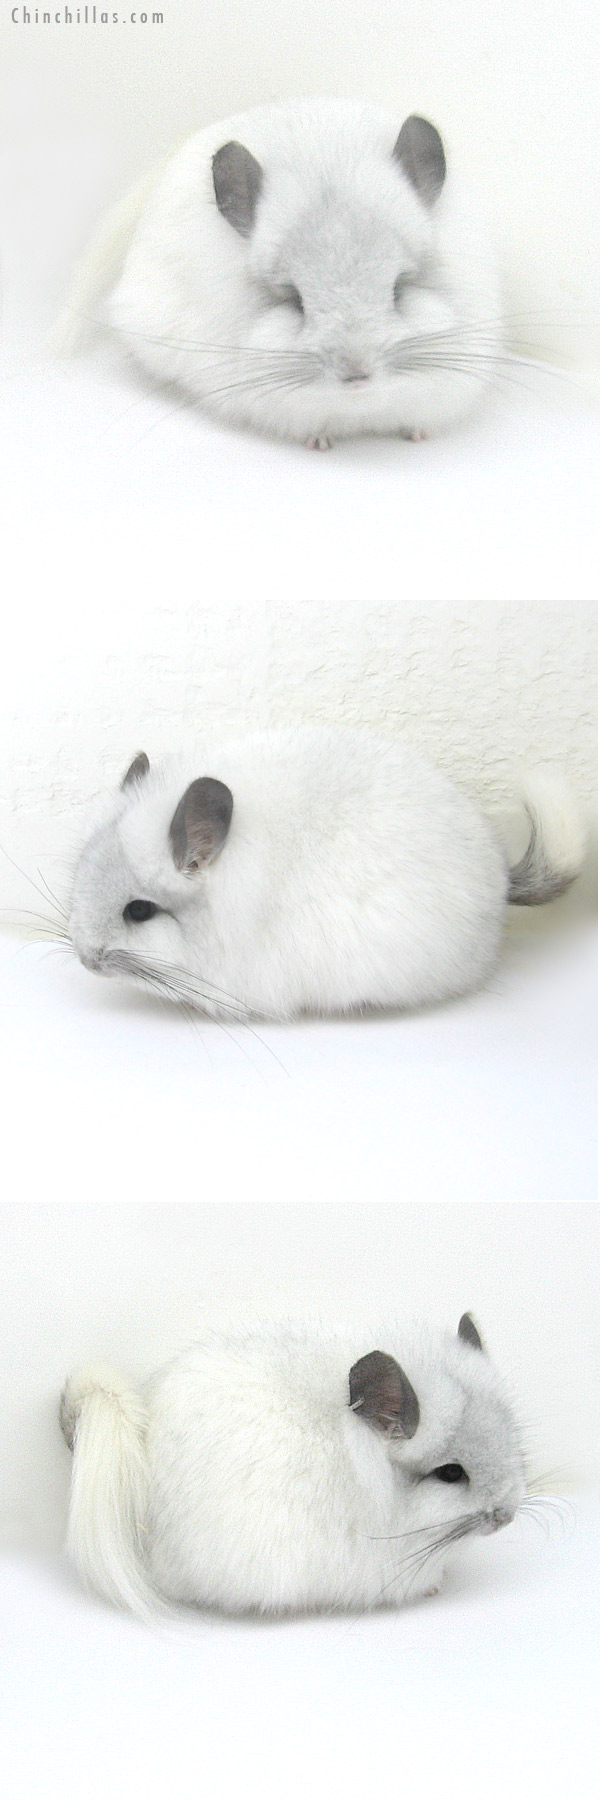 Chinchilla or related item offered for sale or export on Chinchillas.com - 13012 Exceptional White Mosaic Royal Persian Angora Female Chinchilla